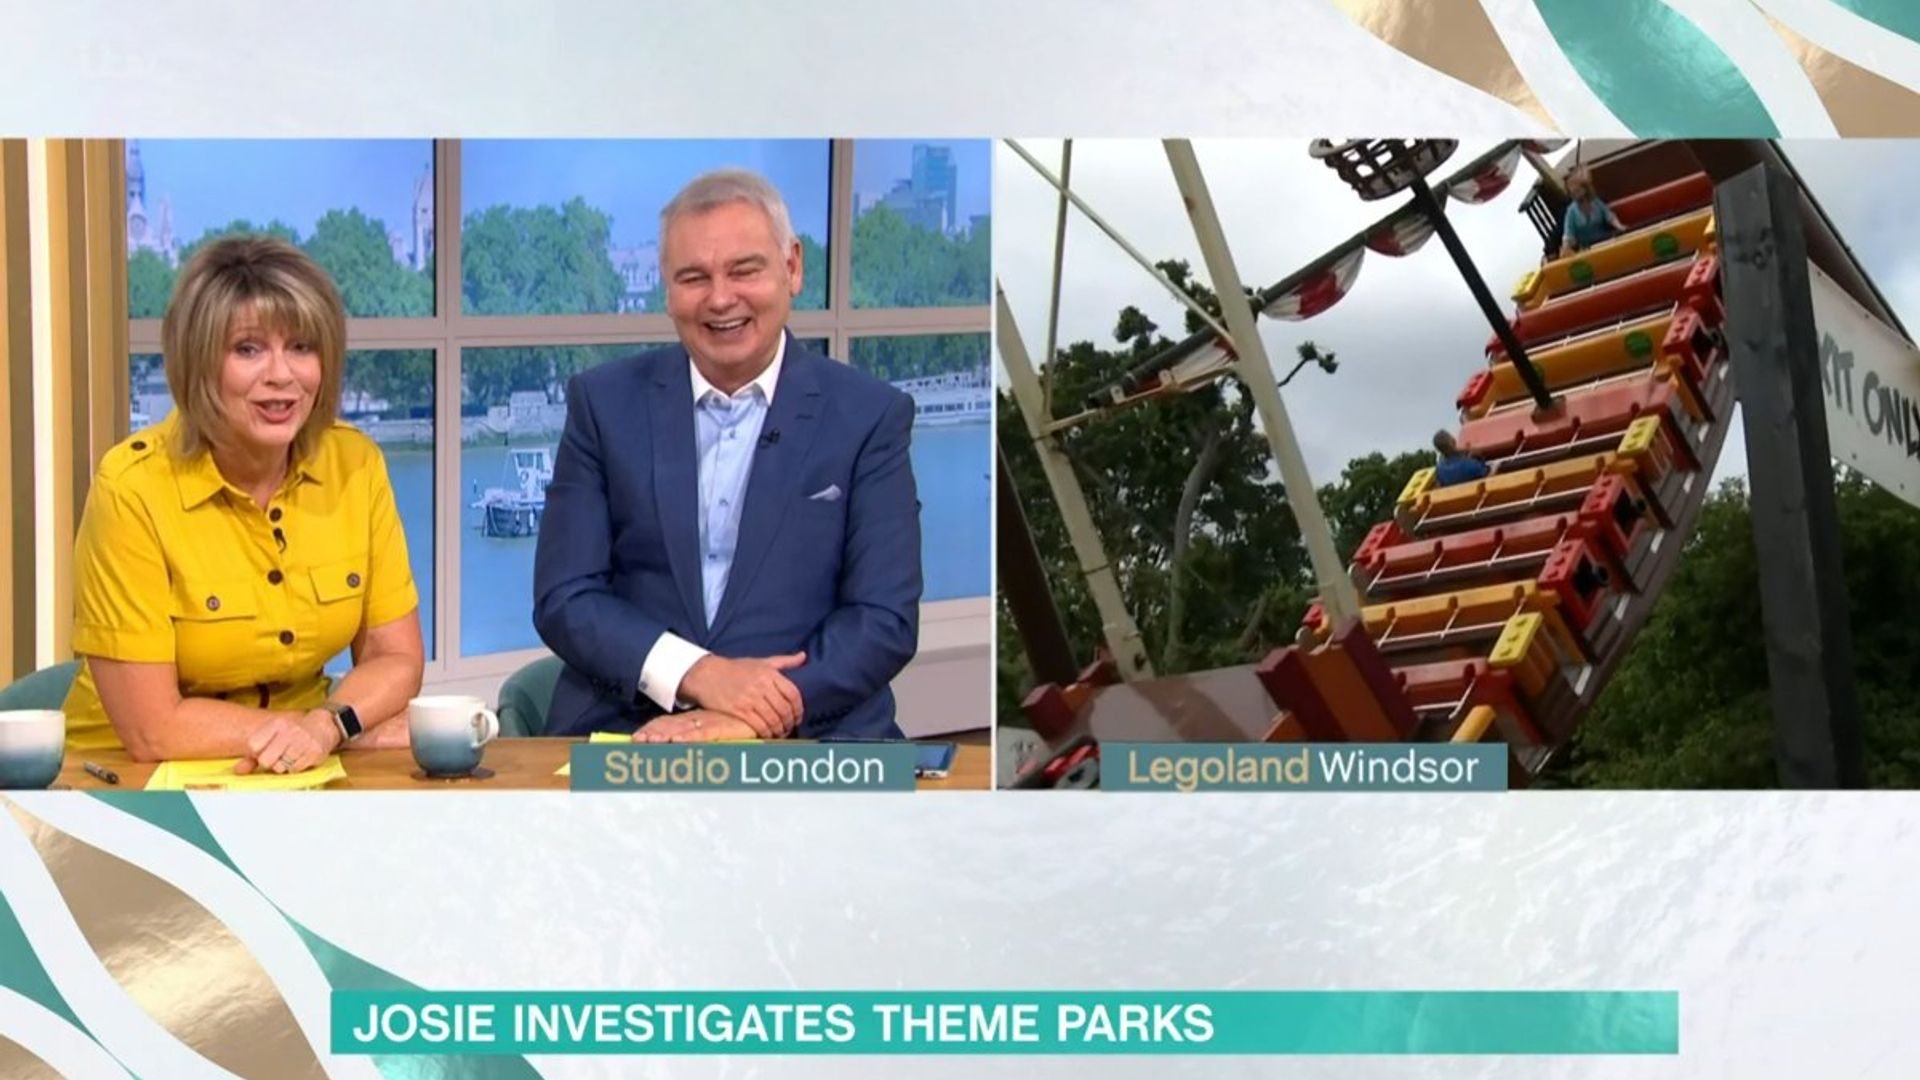 Eamonn Holmes and Ruth Langsford cry tears of laughter as interview goes horribly wrong - video